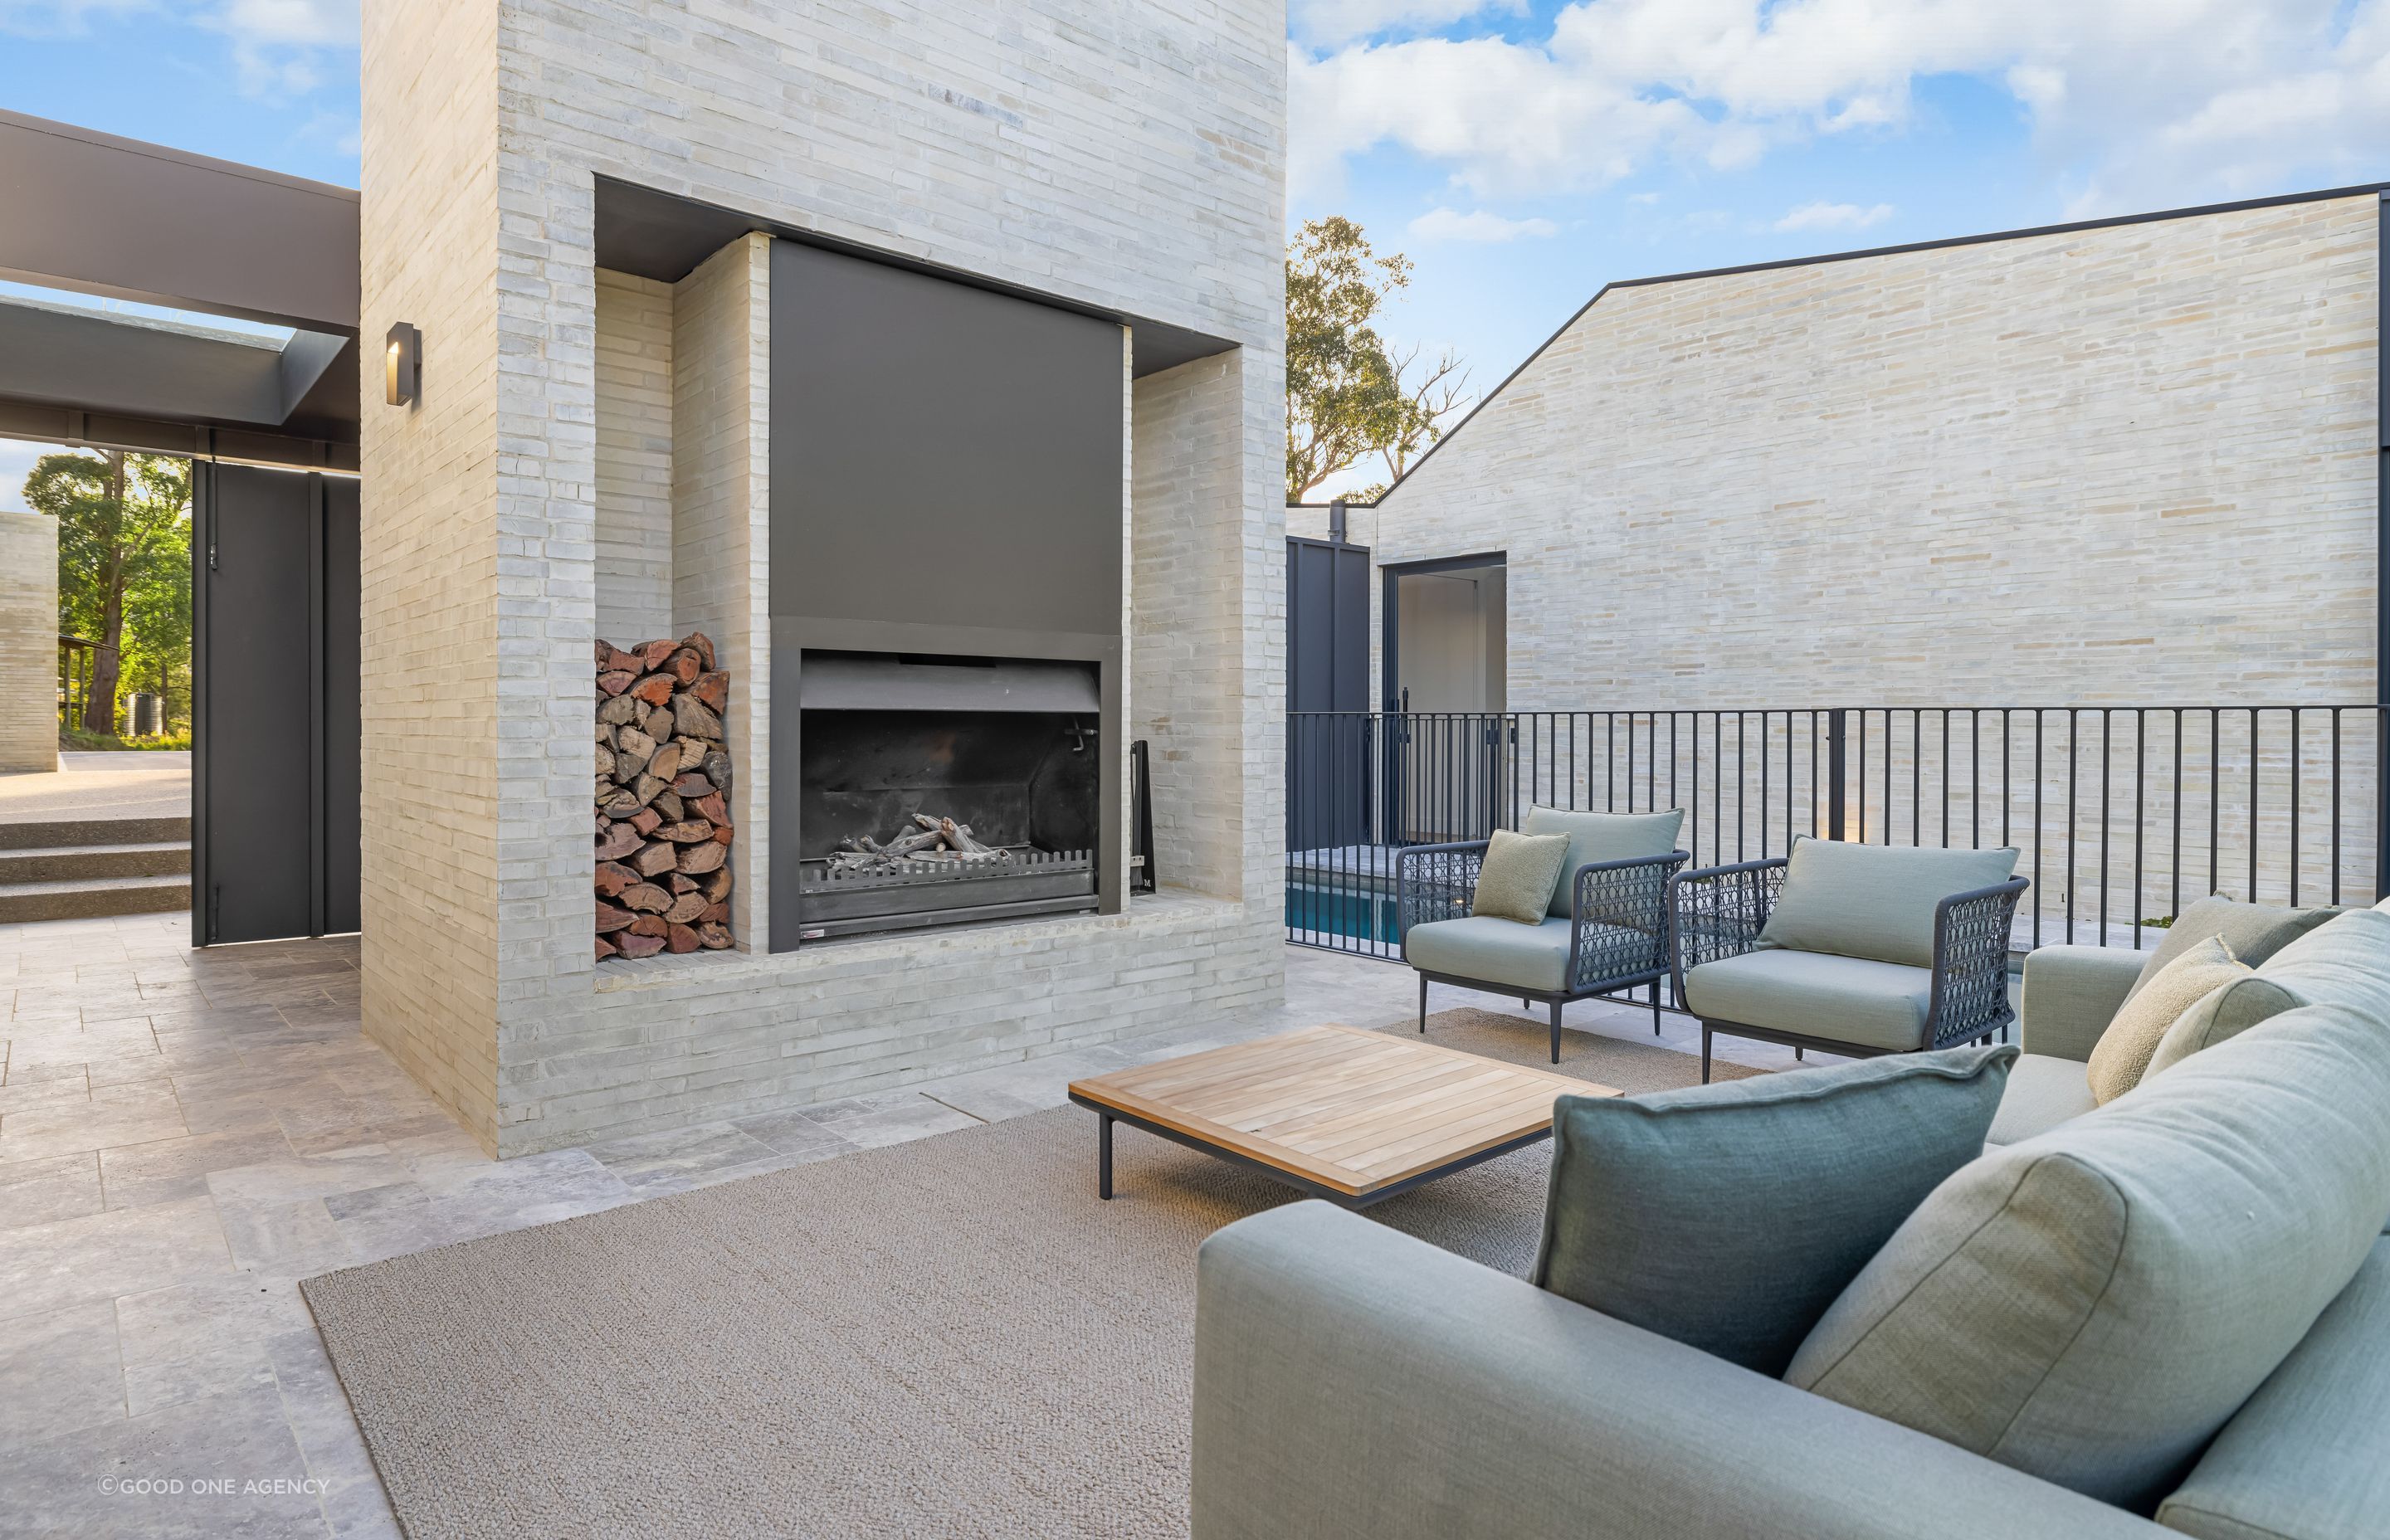 A central fireplace creates a cosy atmosphere in the courtyard